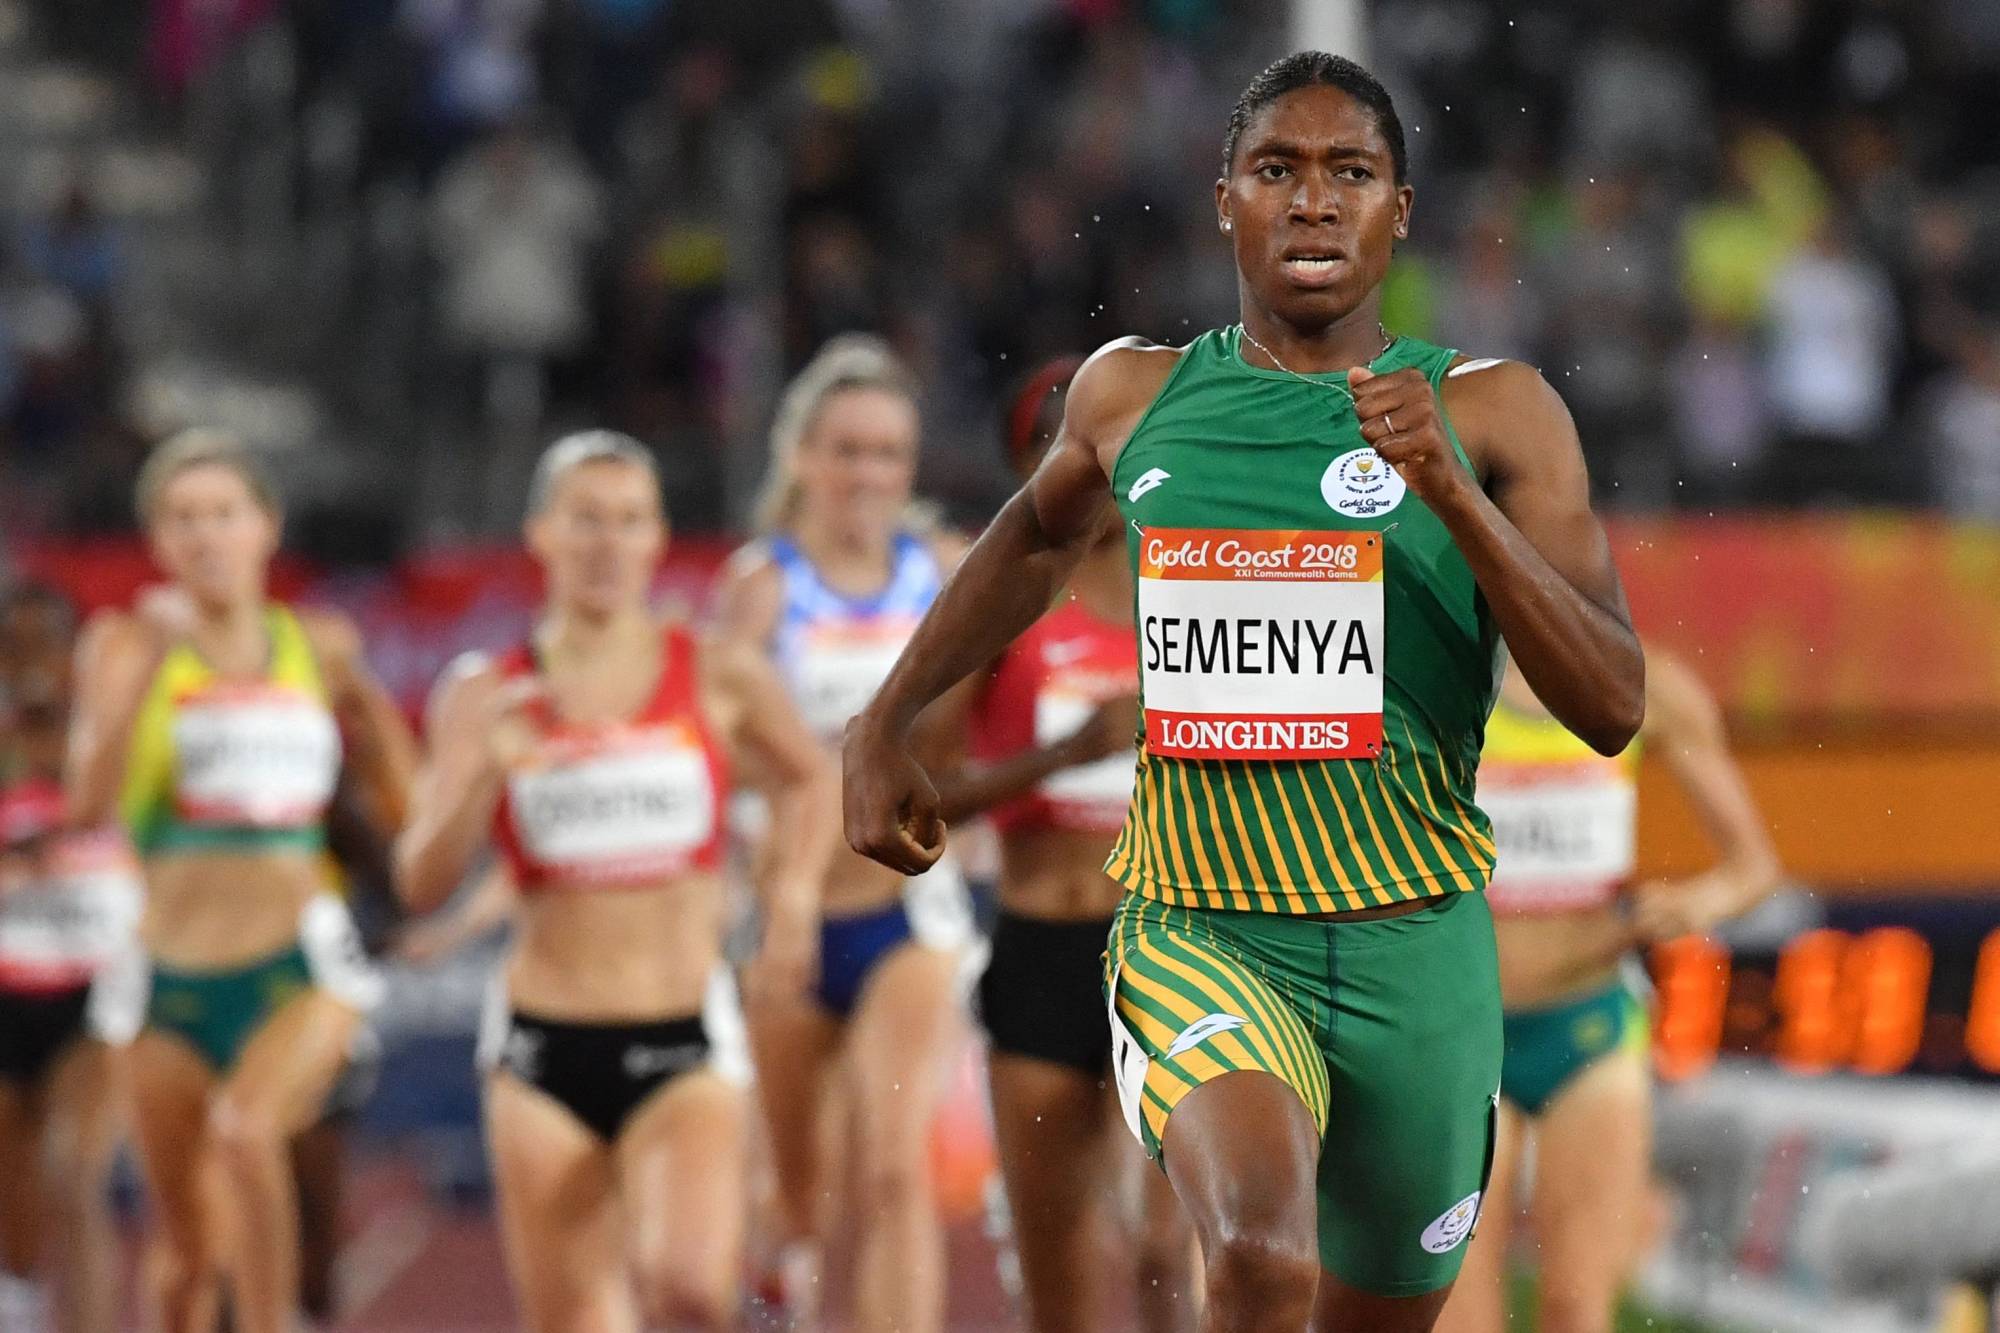 South African athlete Caster Semenya hails court ruling as 'only the  beginning' in legal fight - The Japan Times